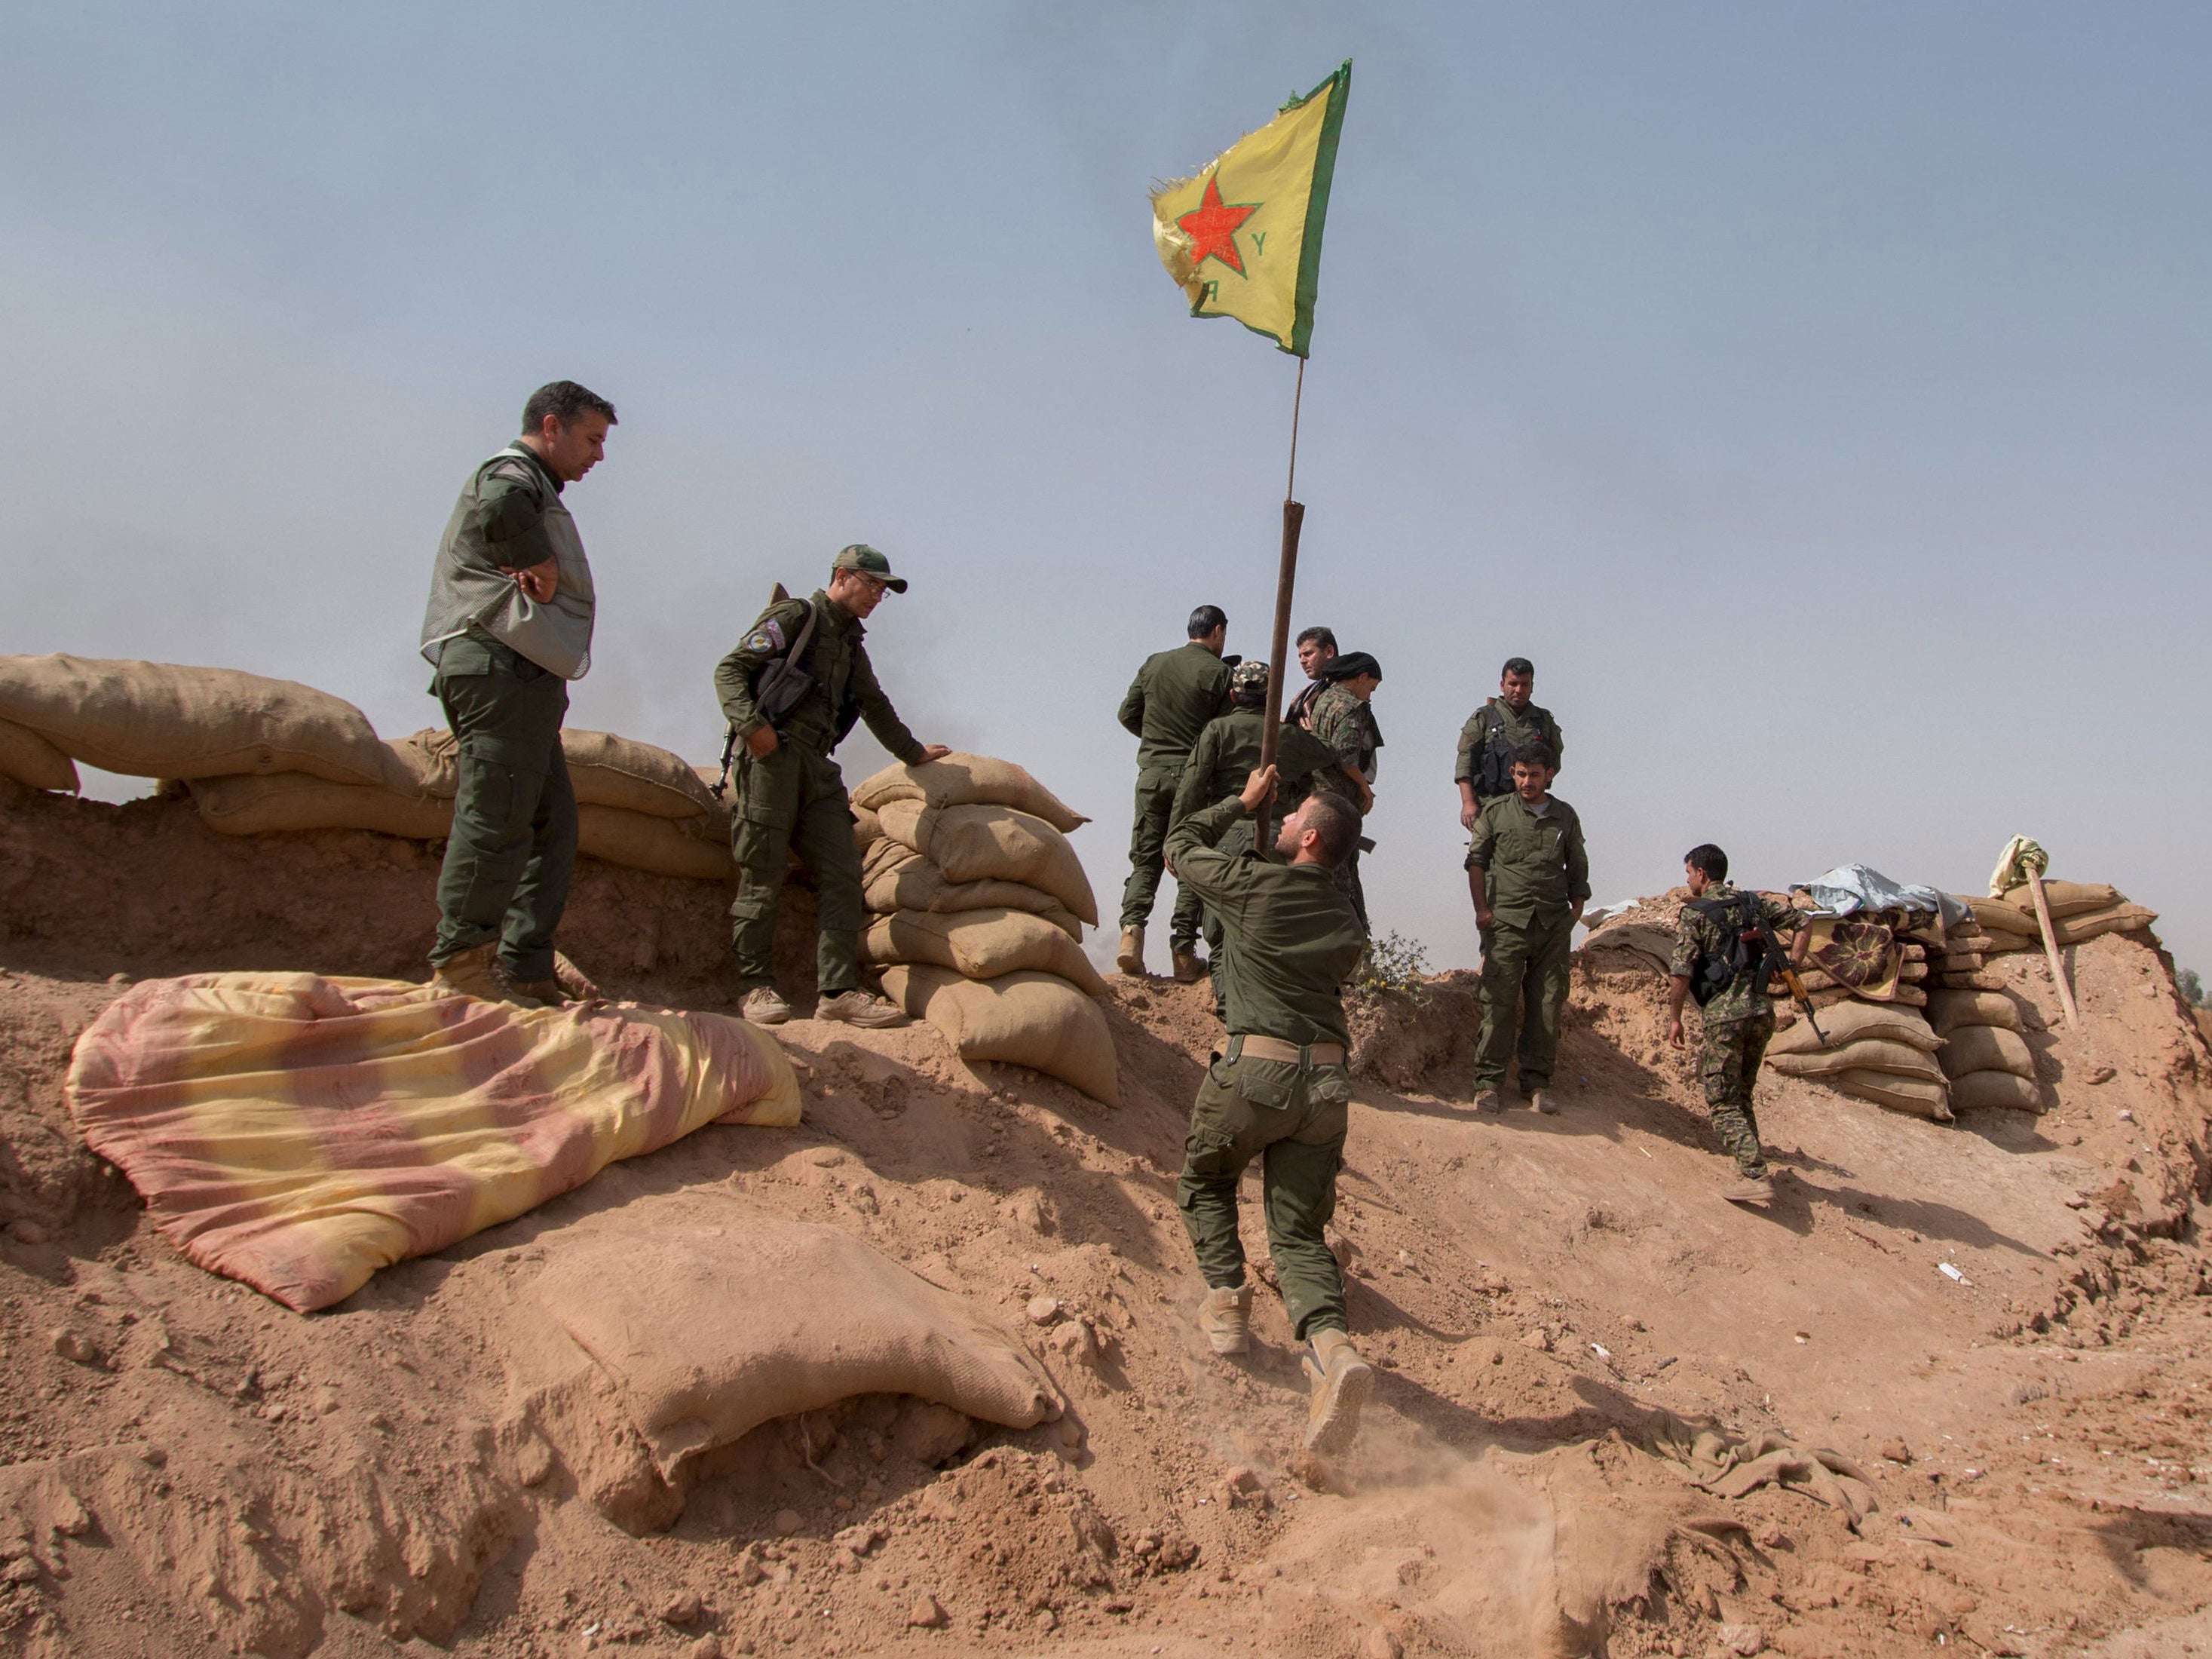 A Kurdish People’s Protection Units (YPG) flag is raised in a village near Mount Abdulaziz on Thursday, after retaking the territory from Isis